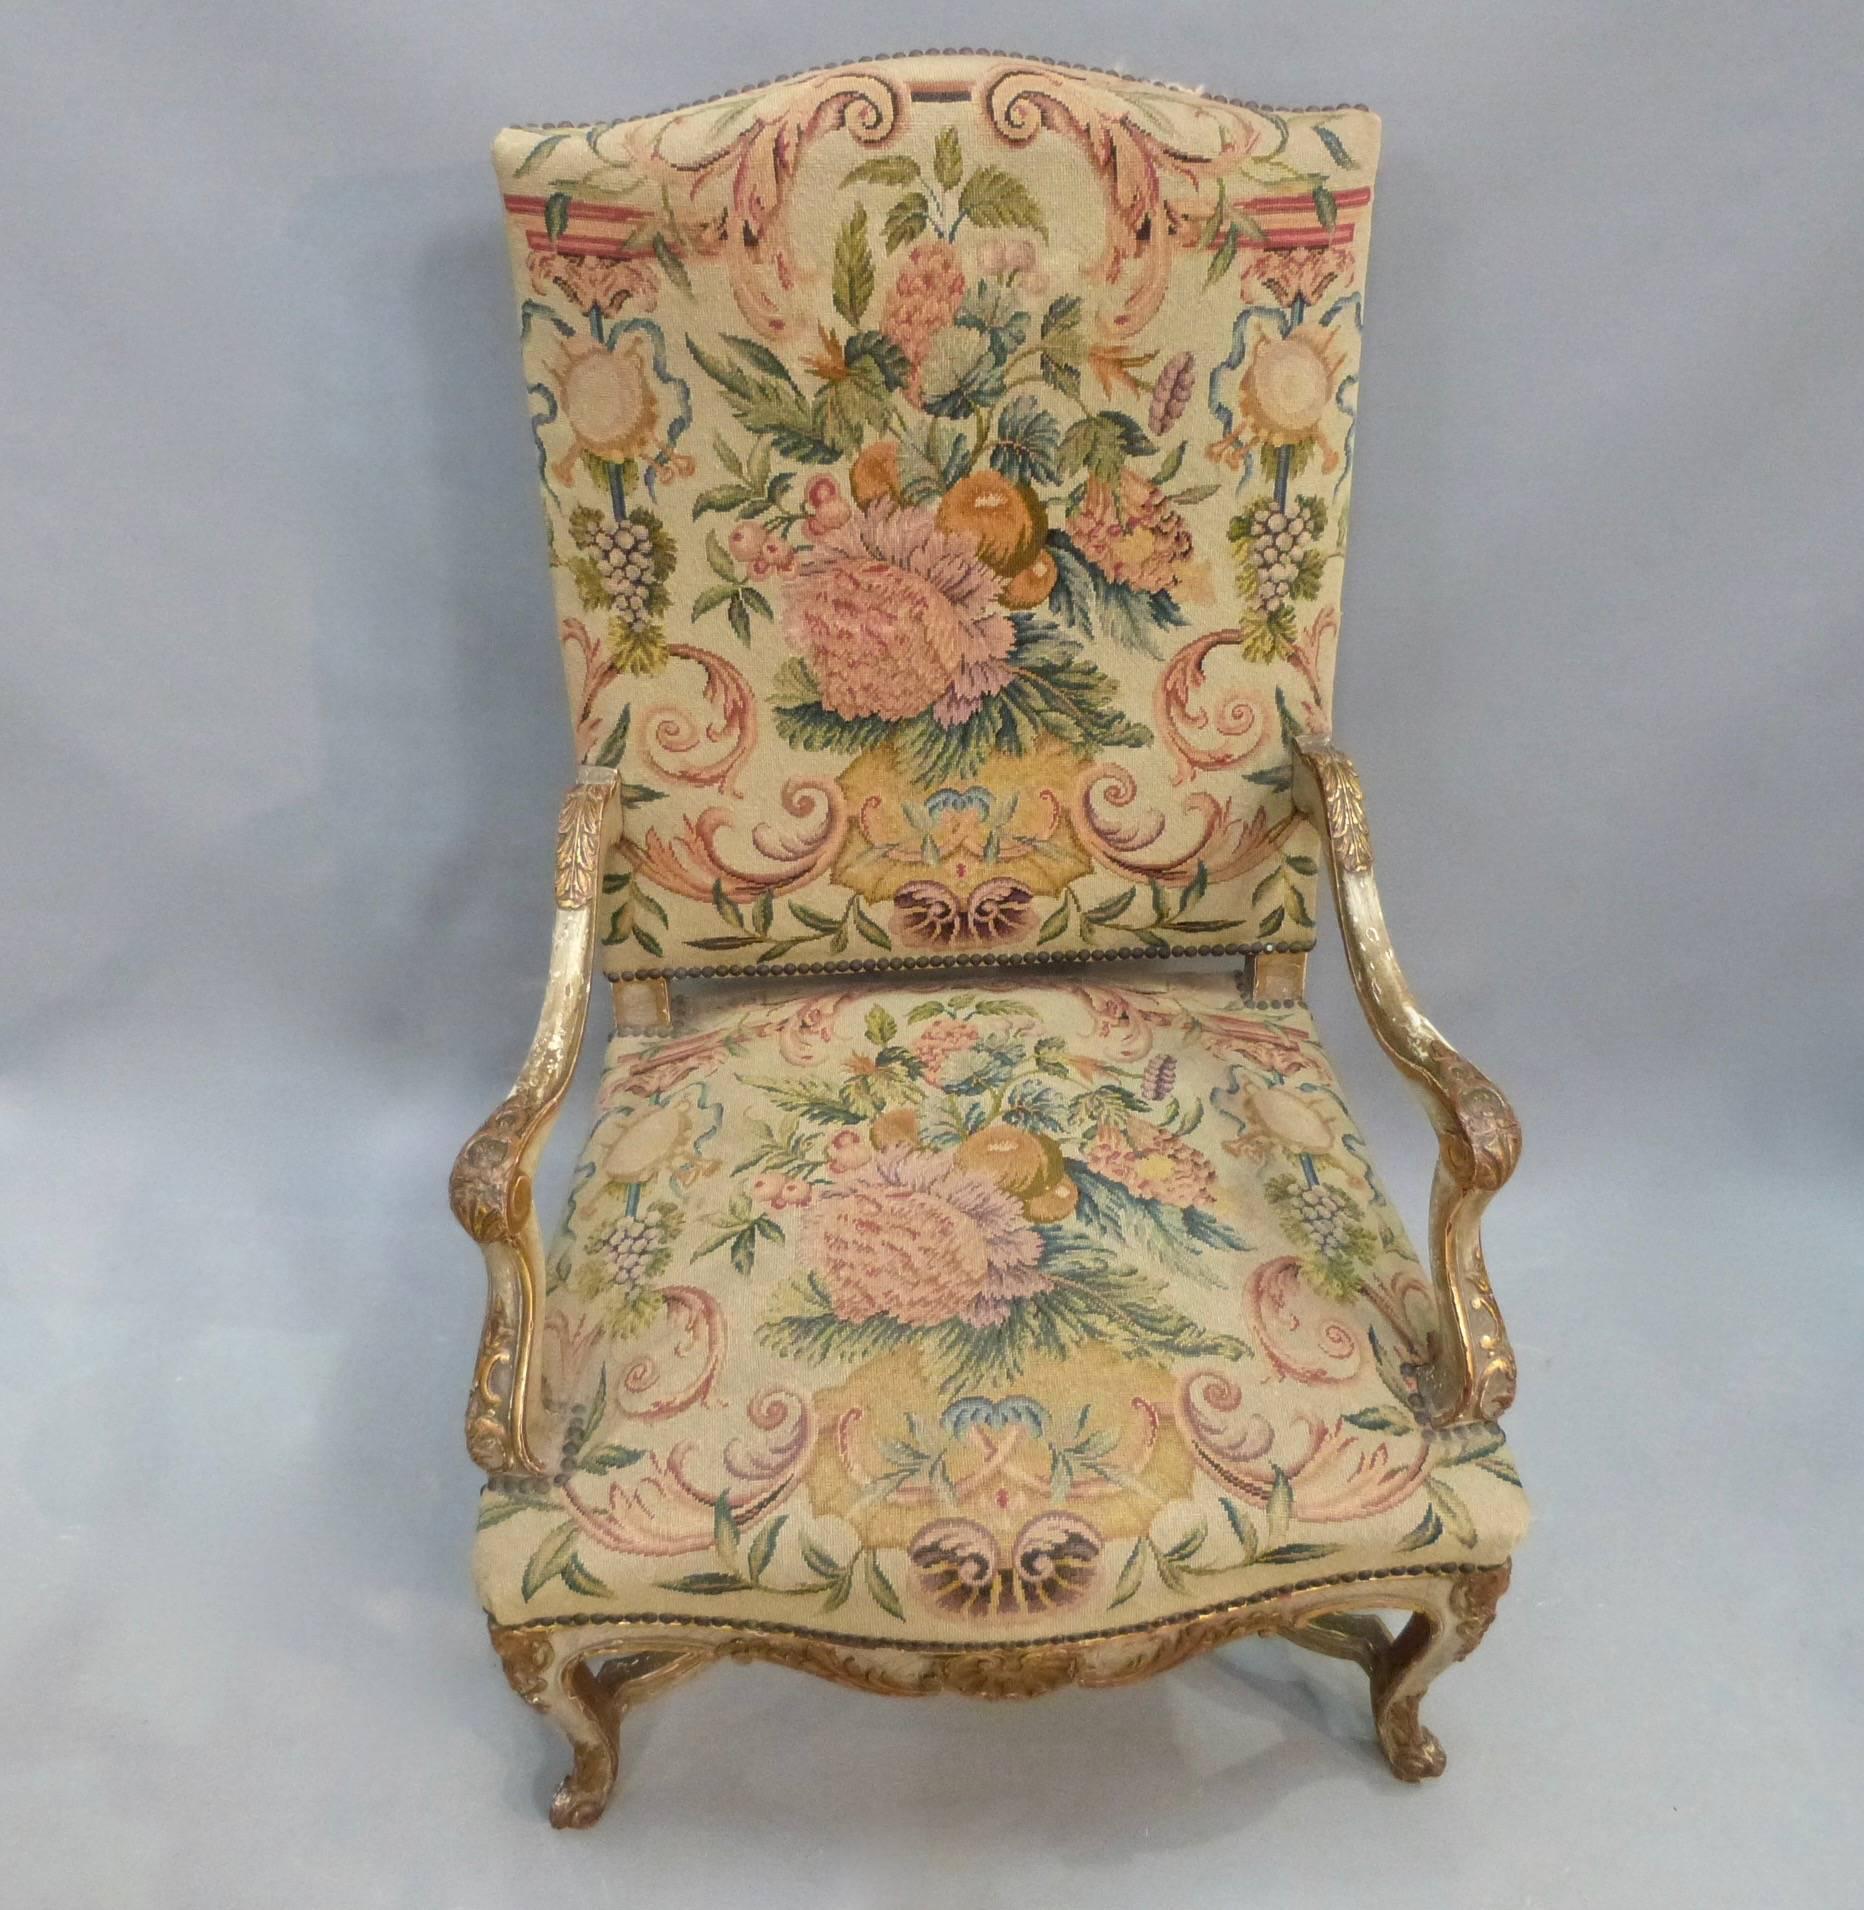 A pair of 19th century French painted and gilt armchairs with original tapestry upholstery, circa 1850.